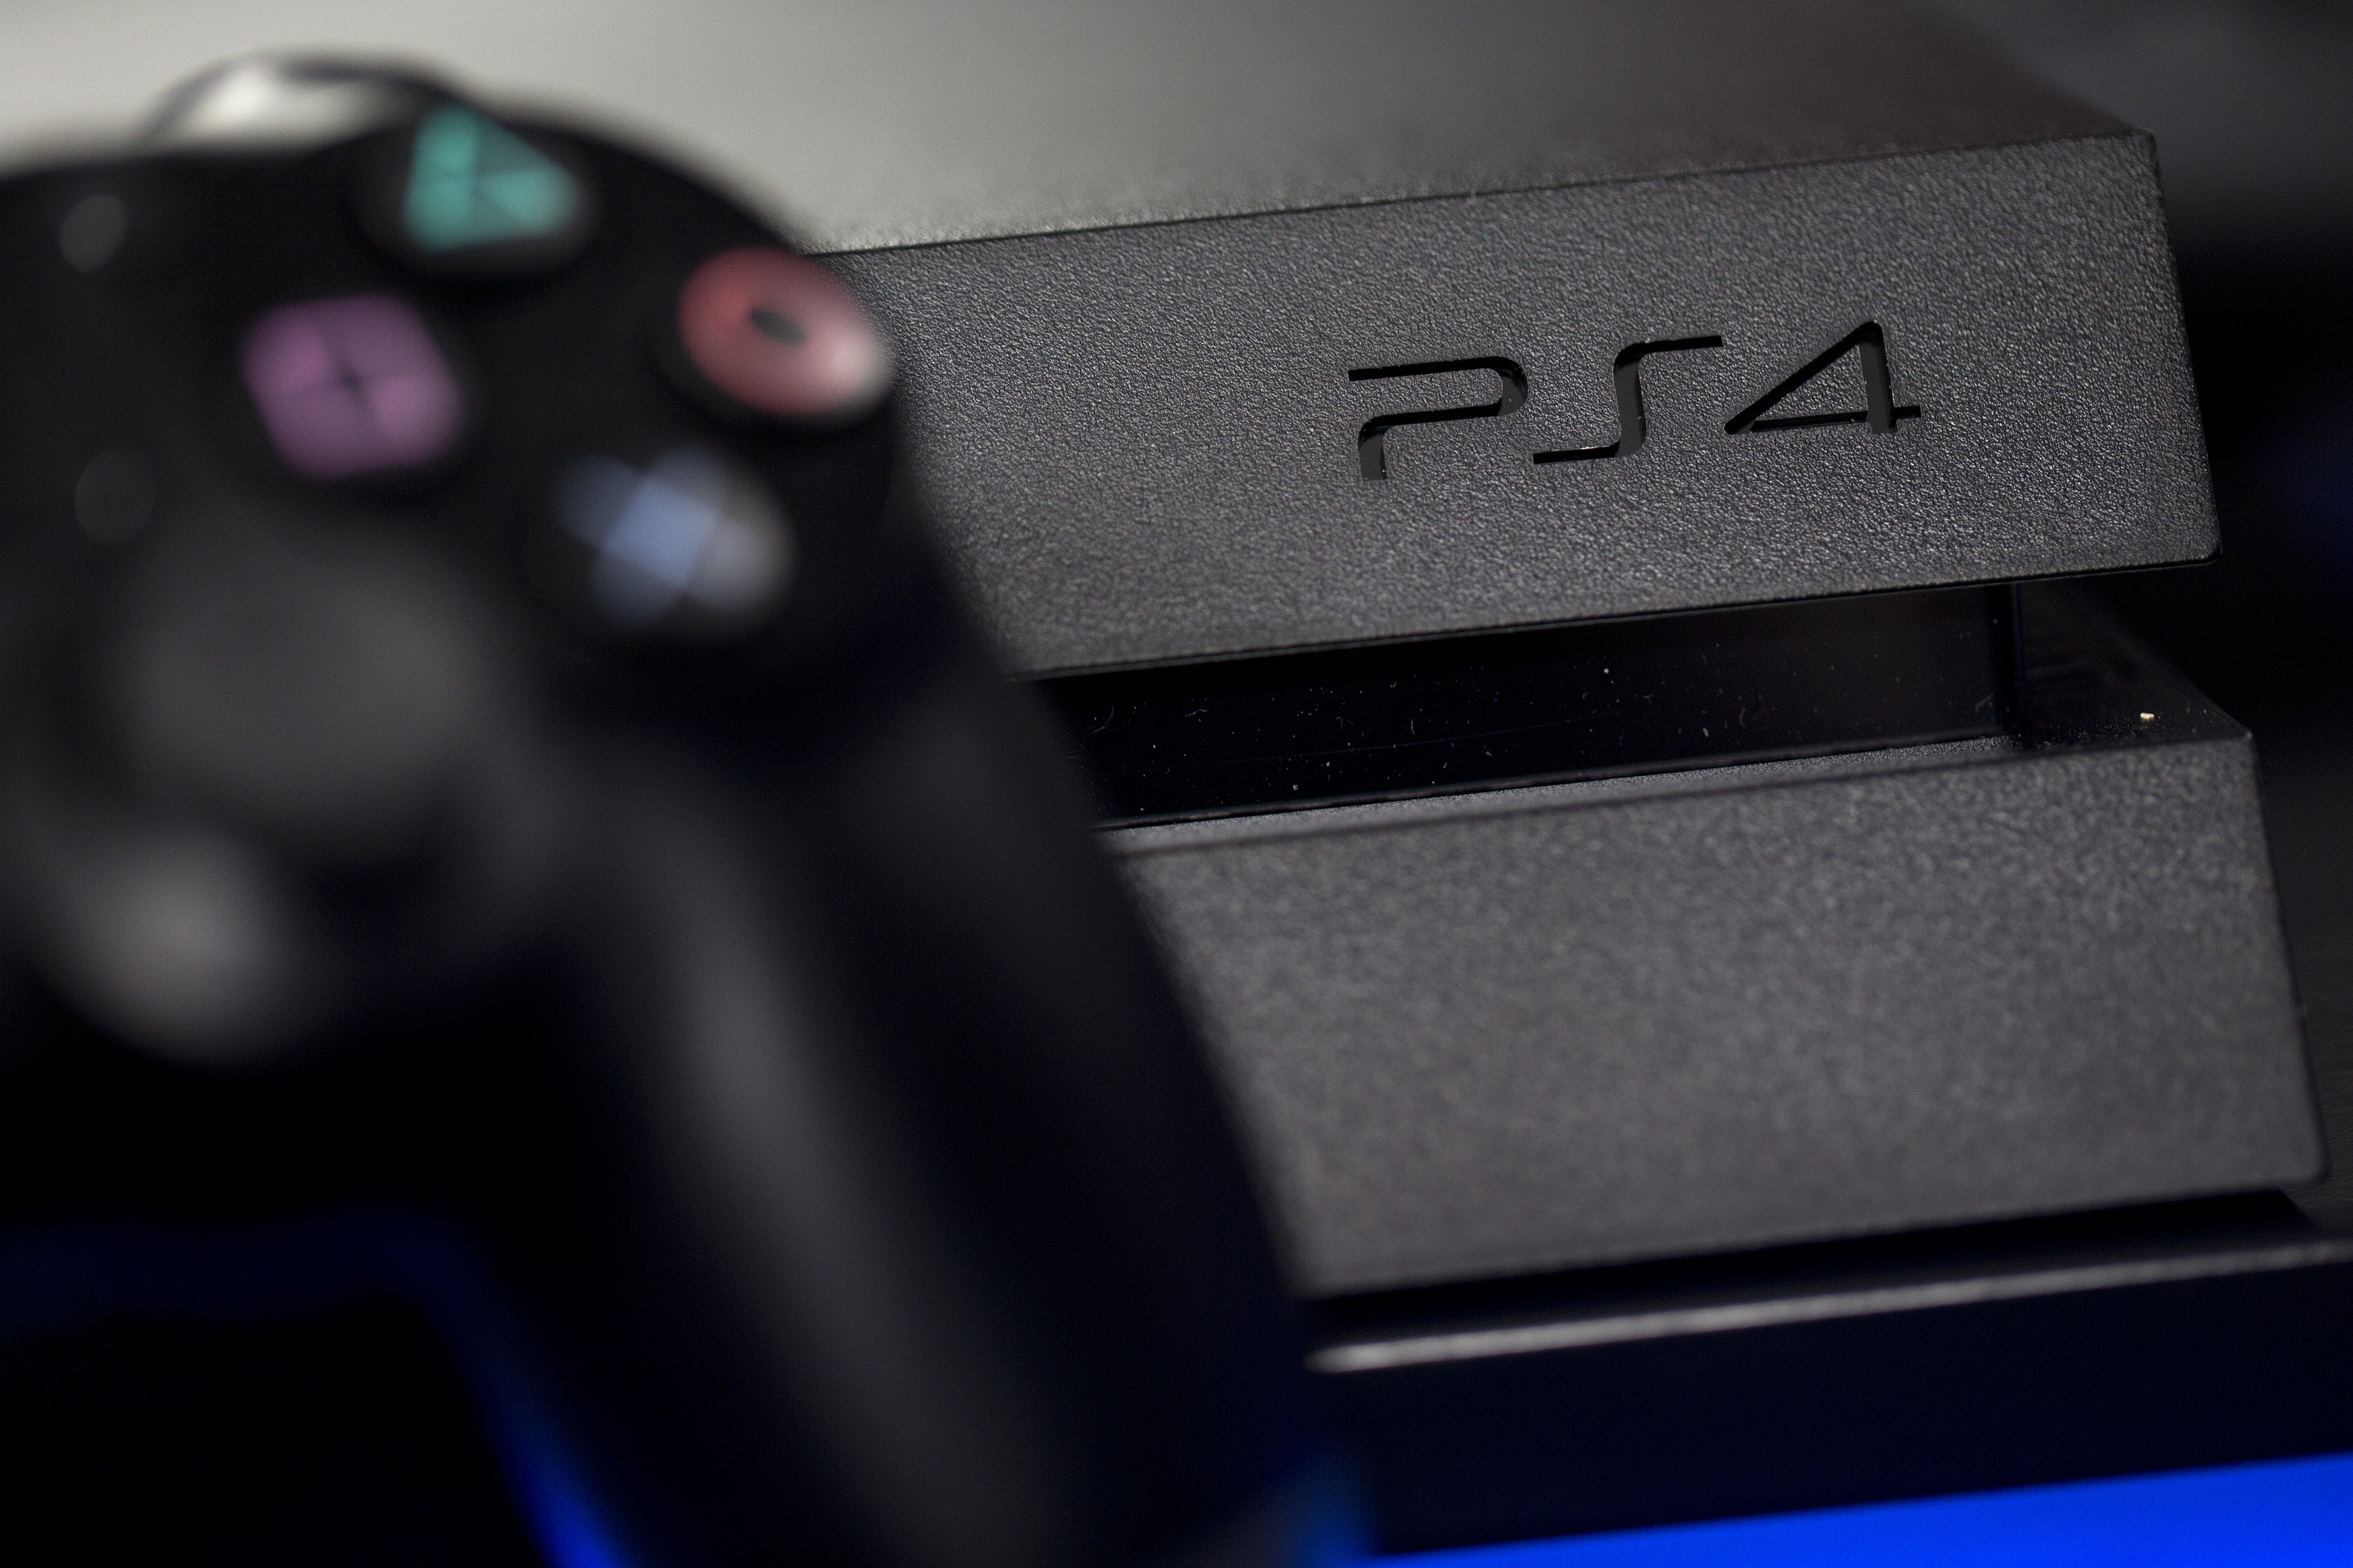 A logo sits on the front of a Sony PlayStation 4 (PS4) games console, manufactured by Sony Corp., in this arranged photograph taken in London on Nov. 15, 2013. (Bloomberg/Getty Images)